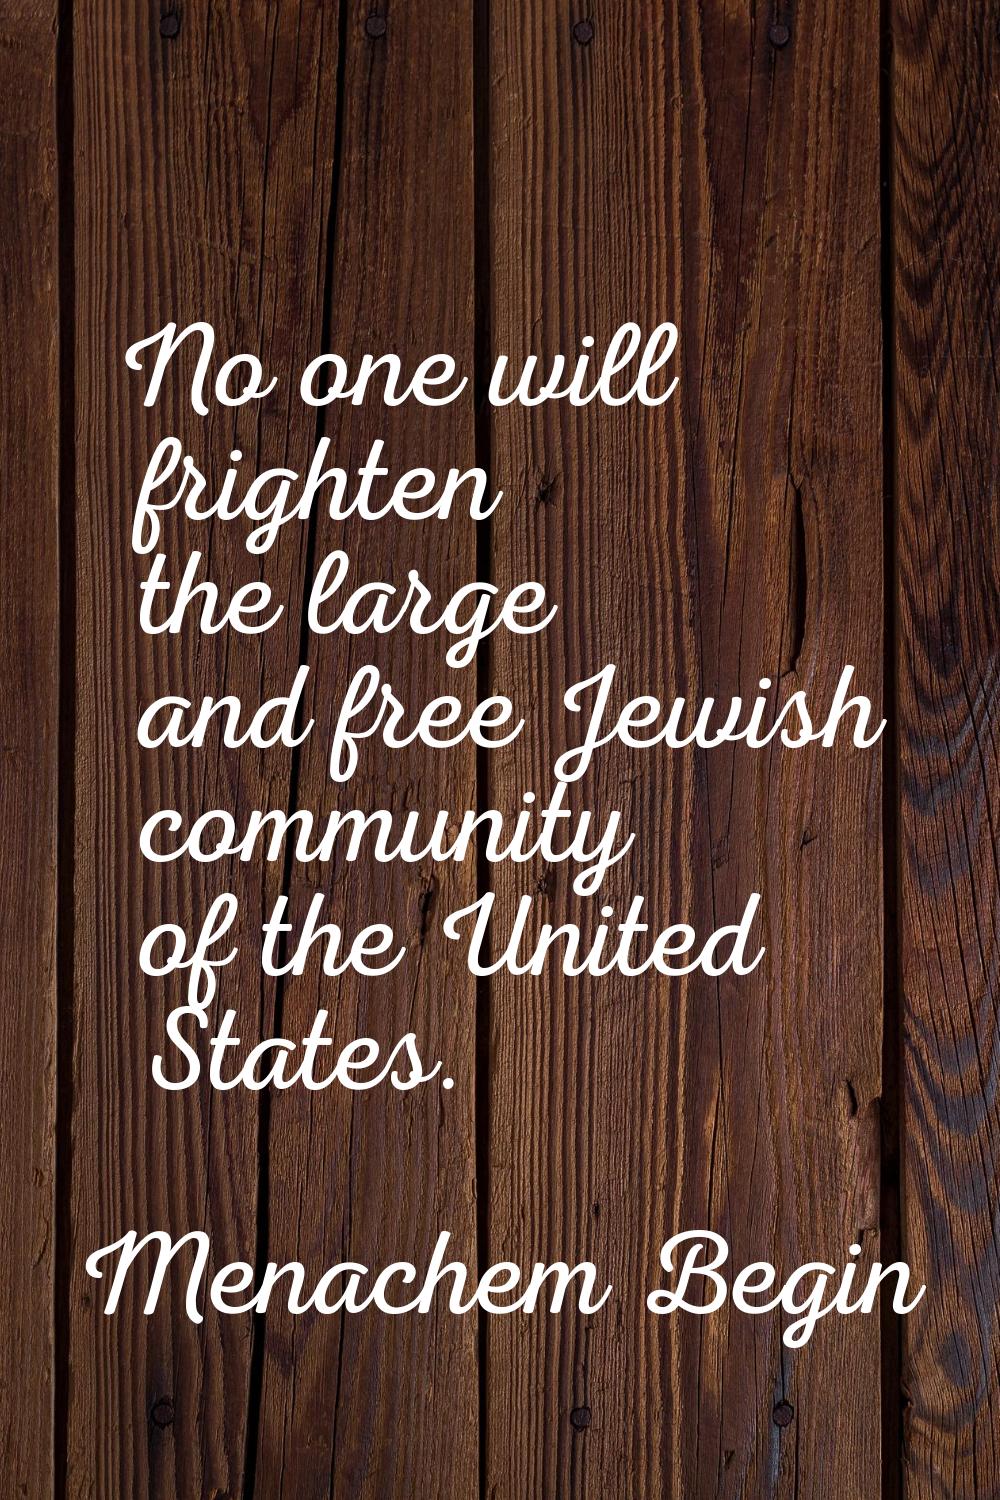 No one will frighten the large and free Jewish community of the United States.